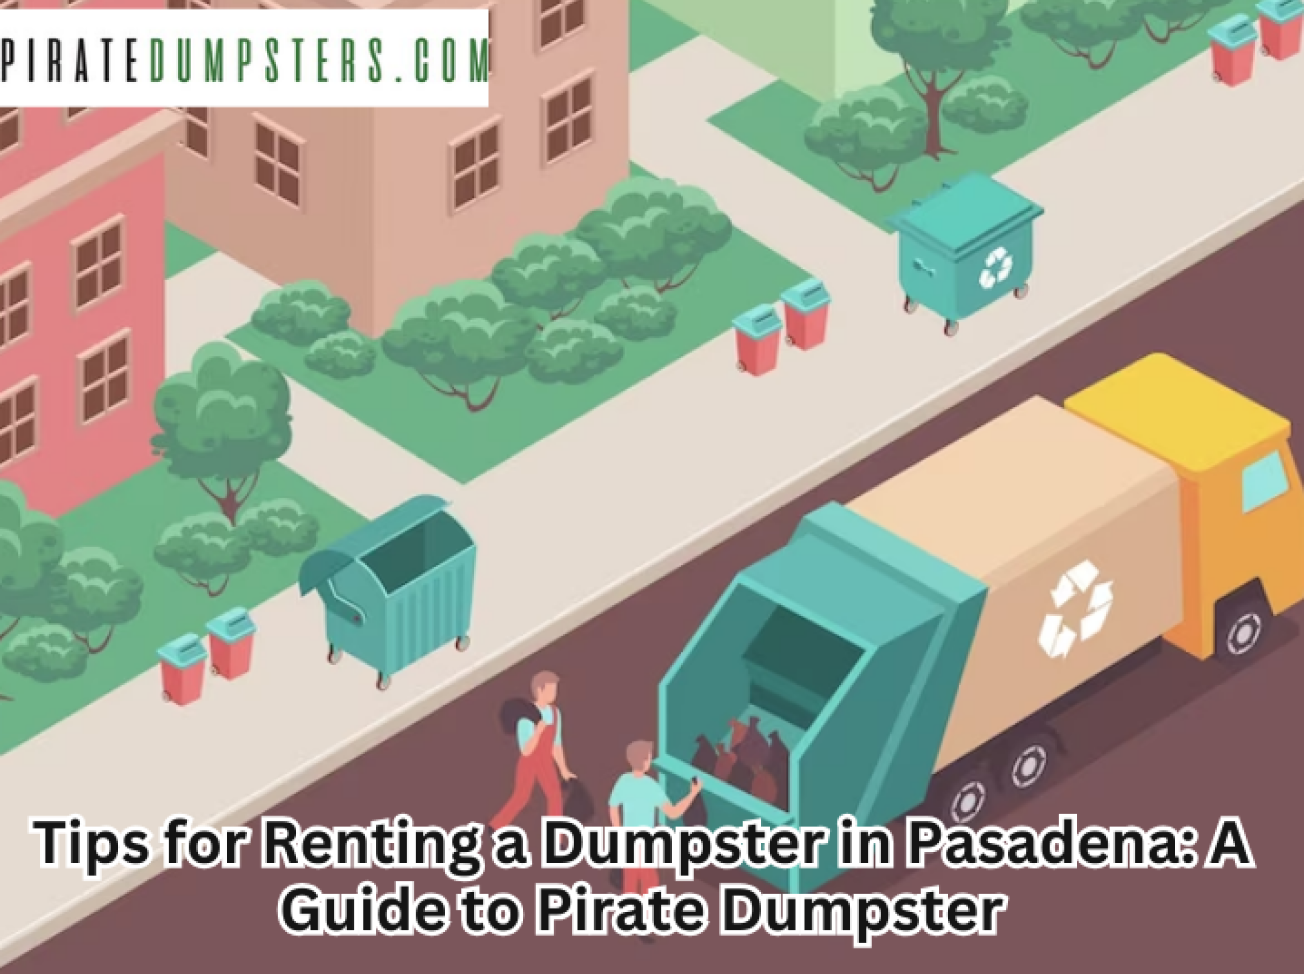 Tips for Renting a Dumpster in Pasadena A Guide to Pirate Dumpster